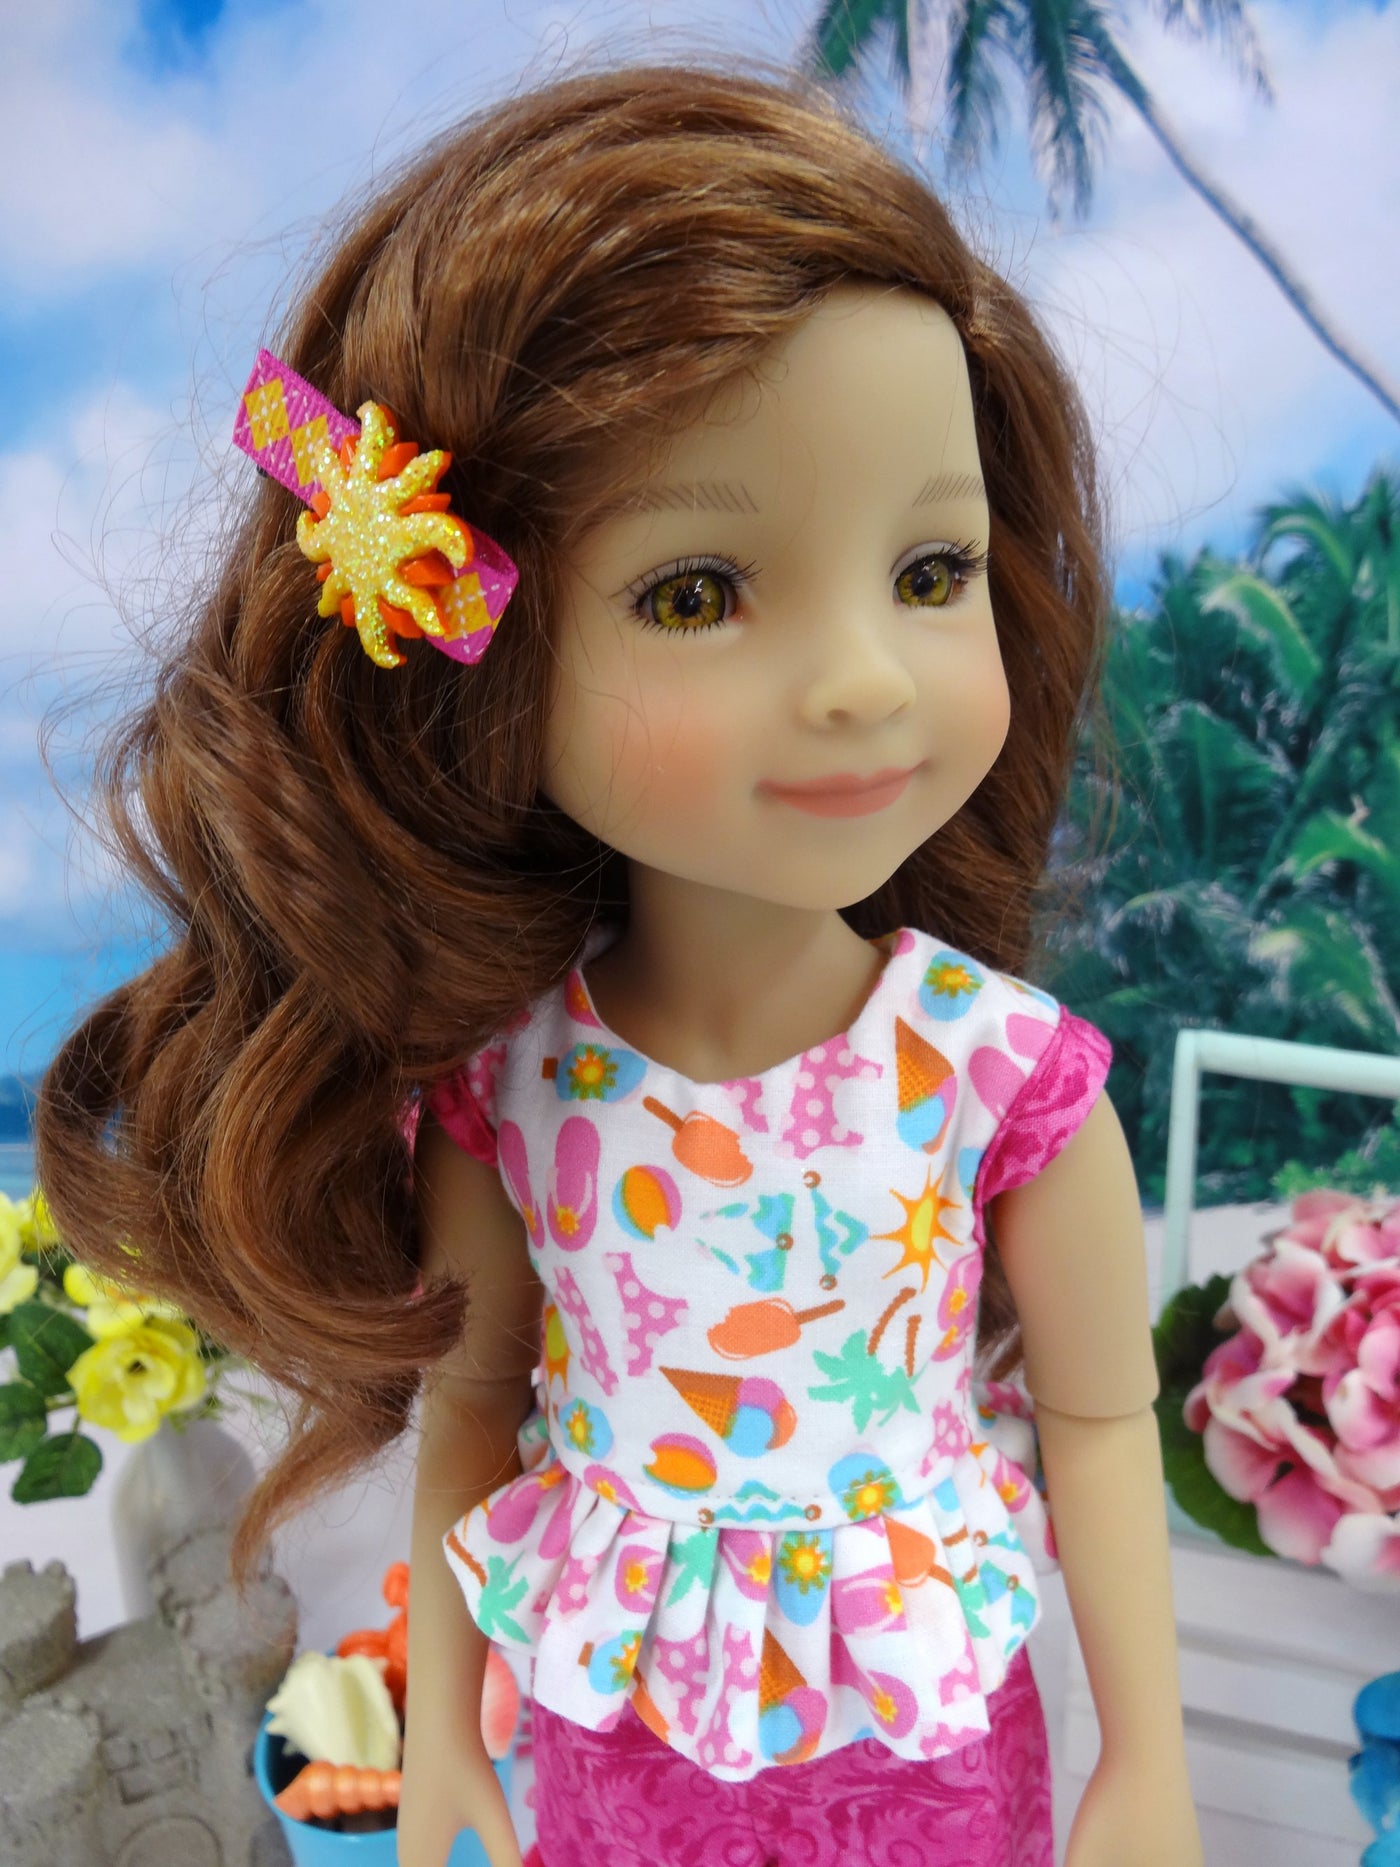 Day at the Beach - top & shorts for Ruby Red Fashion Friends doll